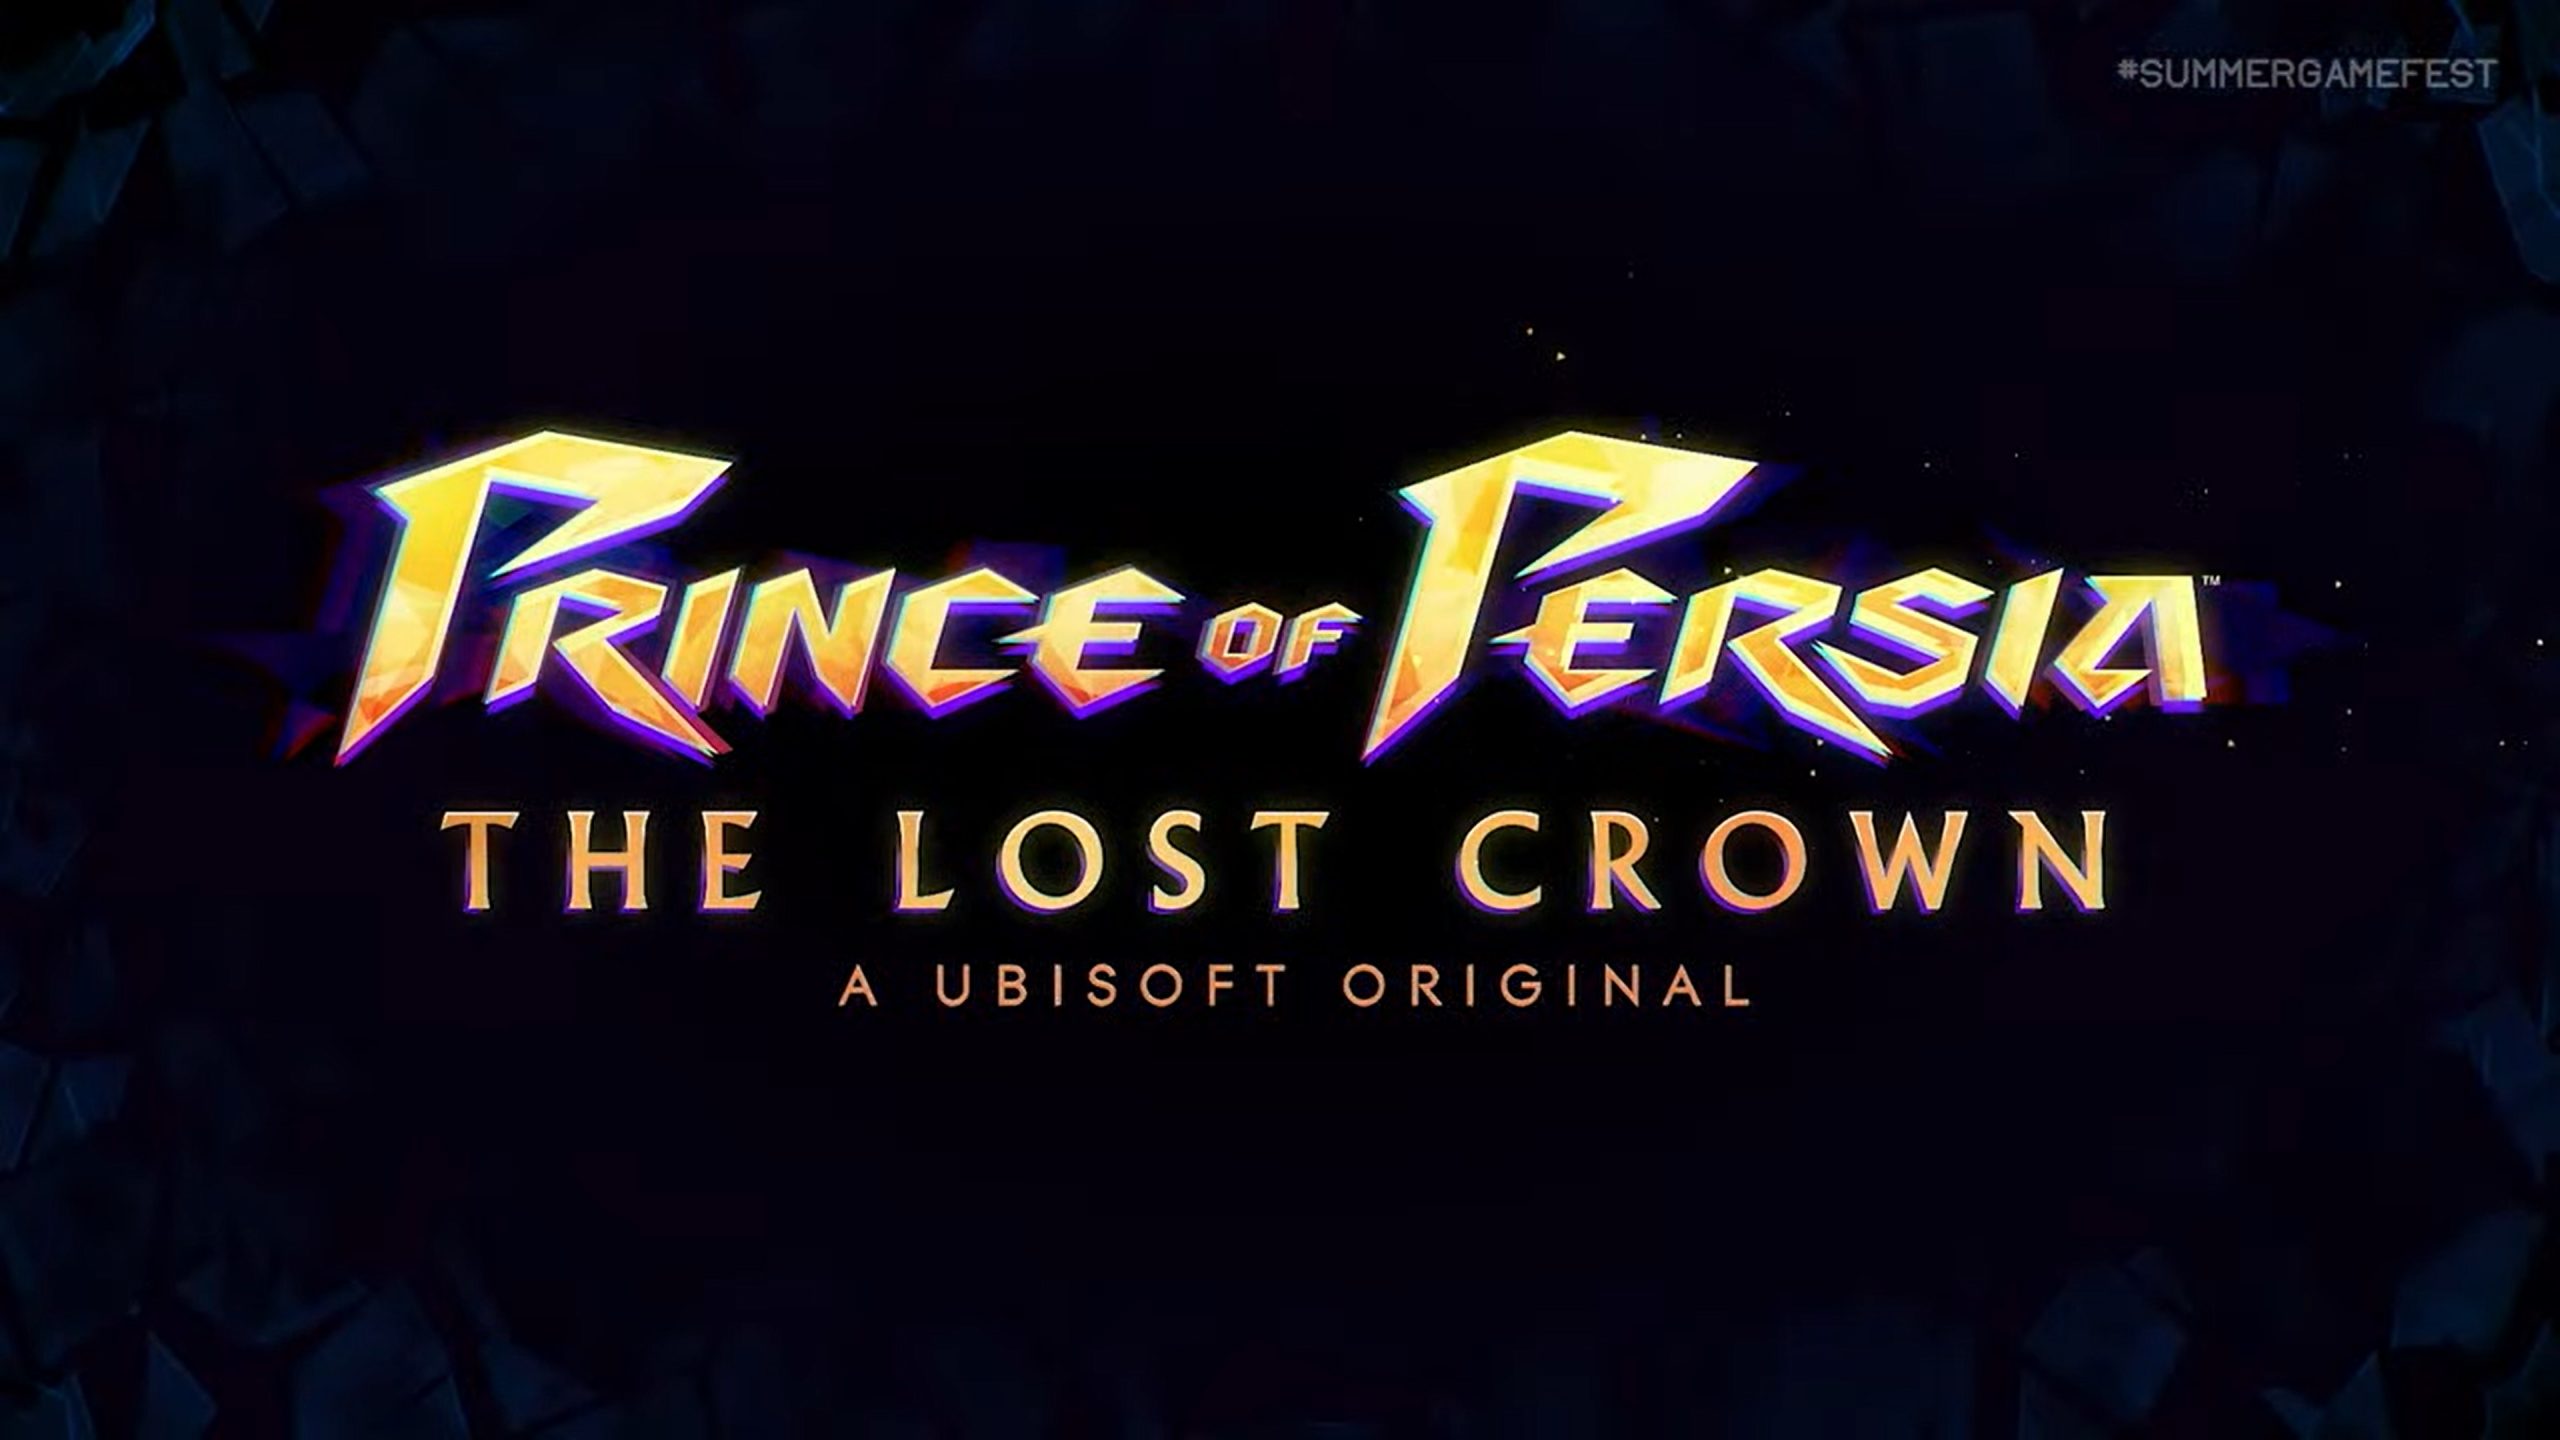 Preview: 'Prince of Persia: The Lost Crown' a Metroidvania game